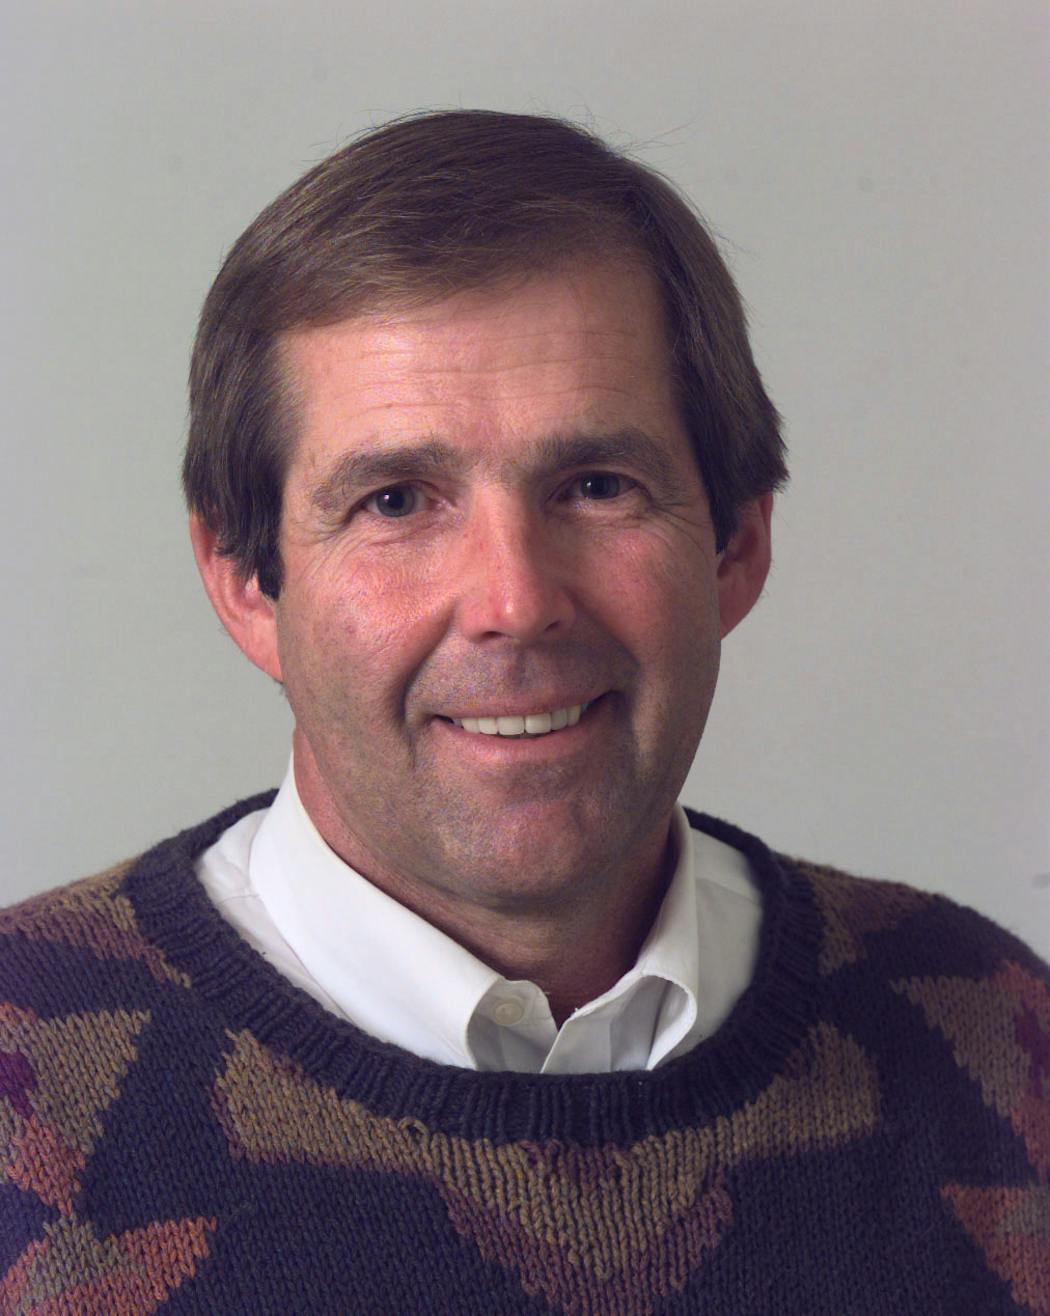 Schara was a longtime Star Tribune outdoors columnist before he made the leap to television.